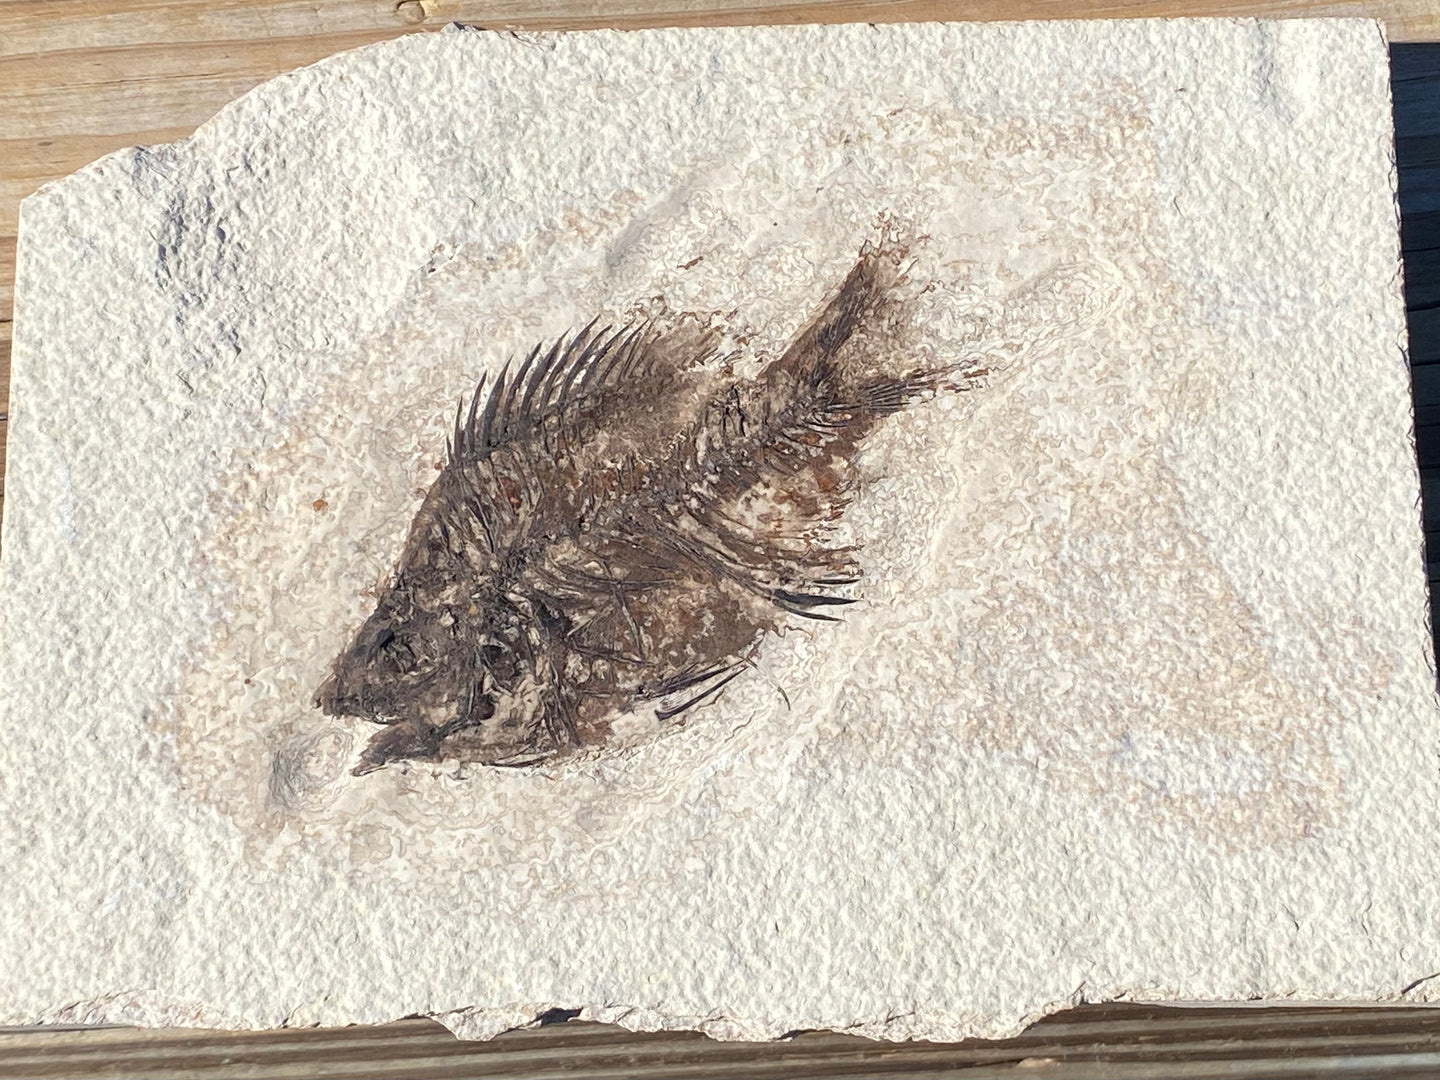 Fossil Fish for sale (Cockerellites) - Wyoming - Fossil Daddy